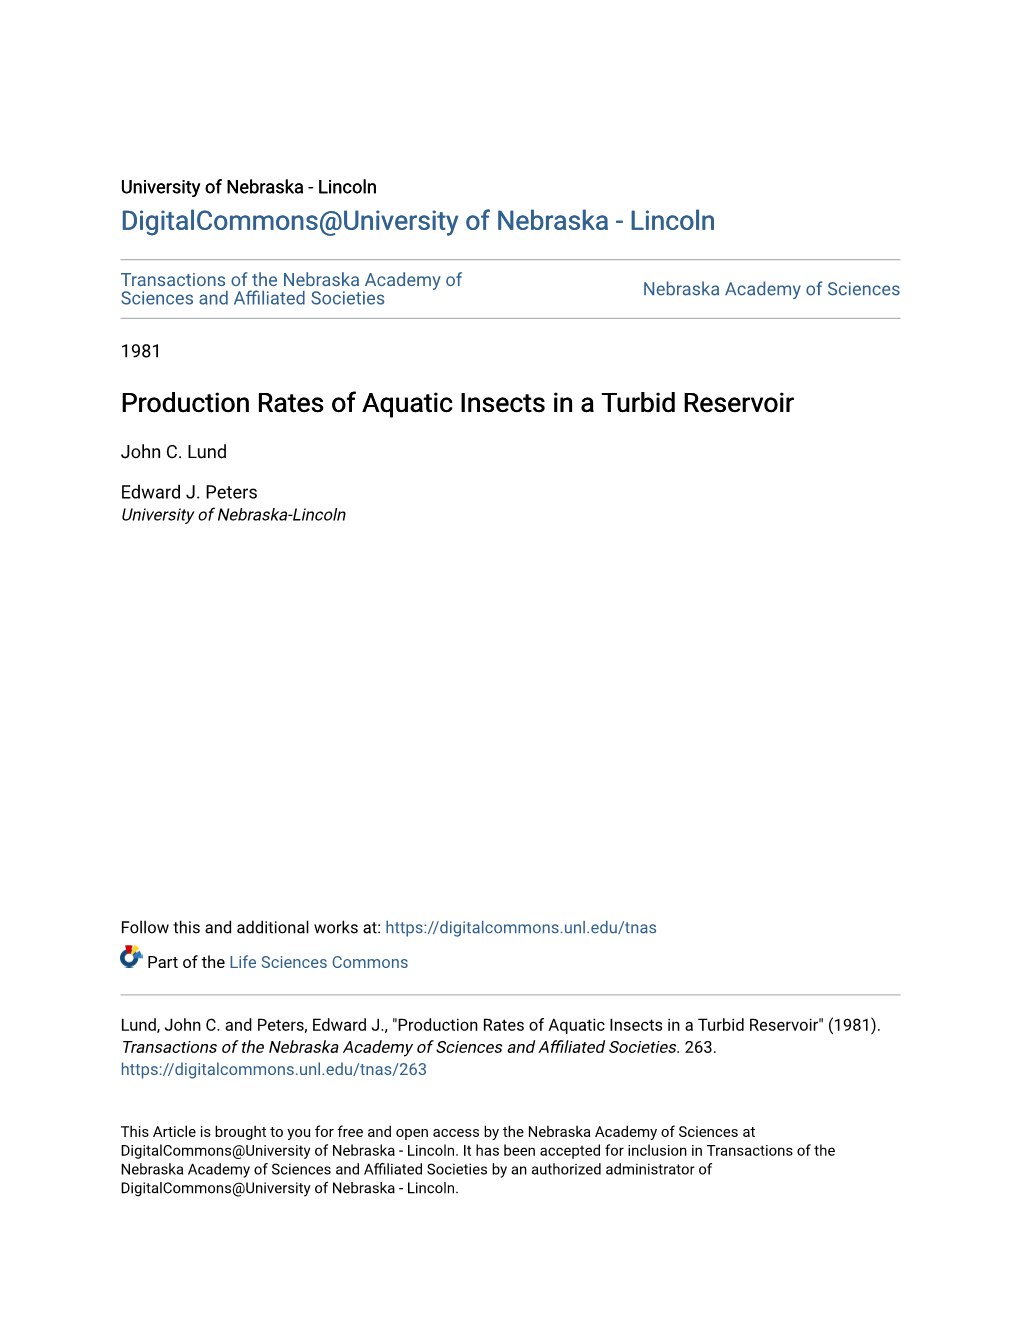 Production Rates of Aquatic Insects in a Turbid Reservoir